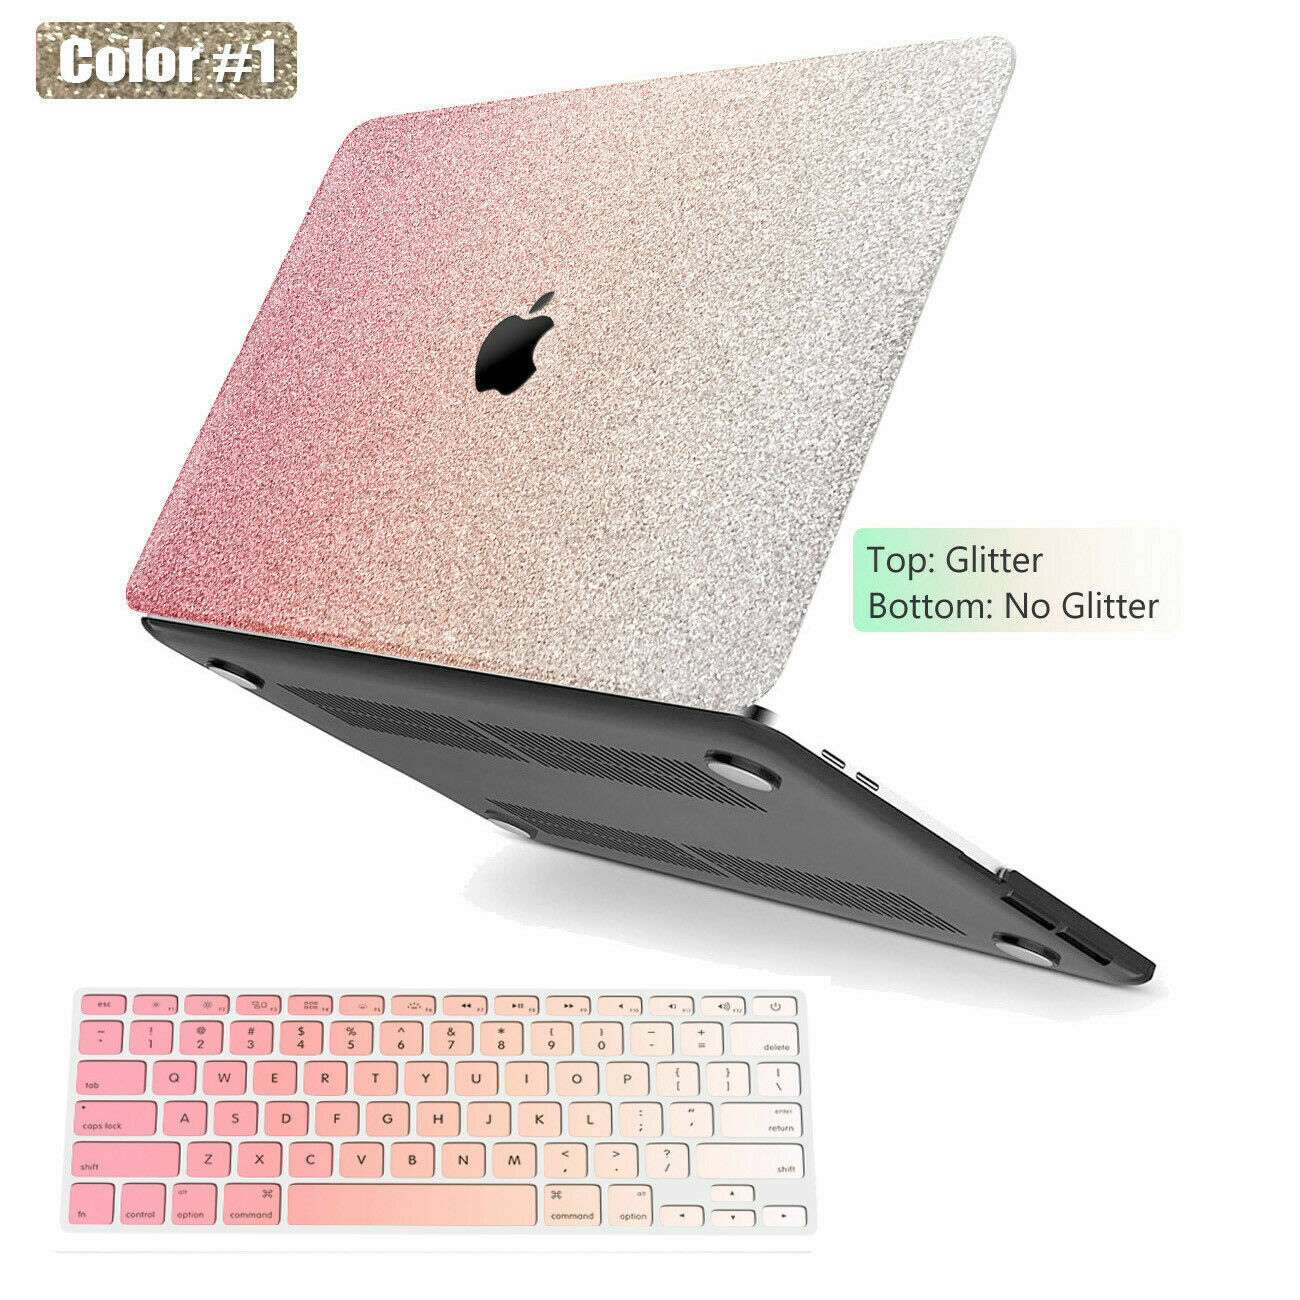 Bling Sparkly Glitter Shiny Rubberized Hard Case Keyboard Cover For New Macbook 